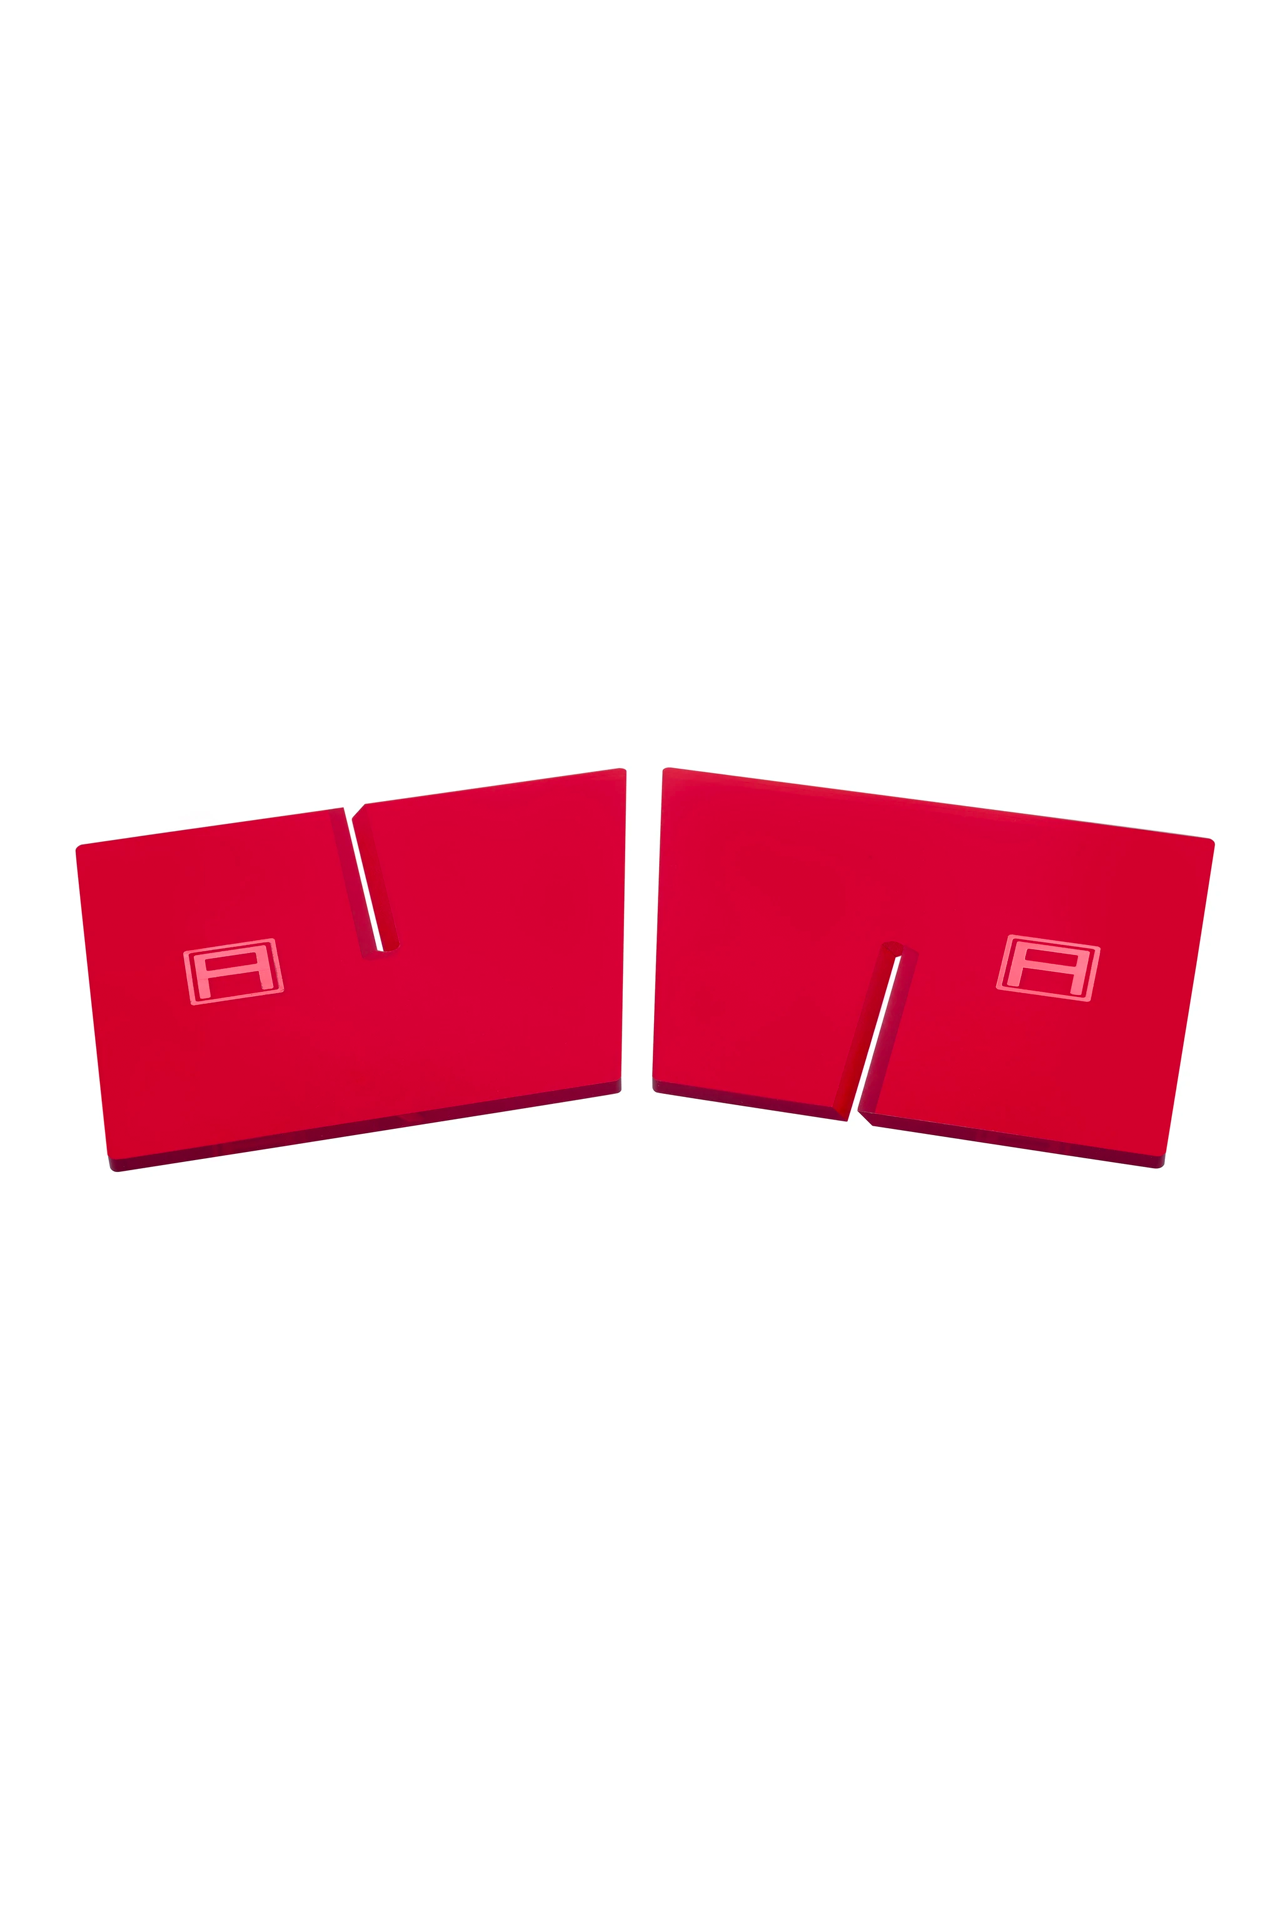 Assouline A Bookstand Red Disassembled Image (6637675905139)